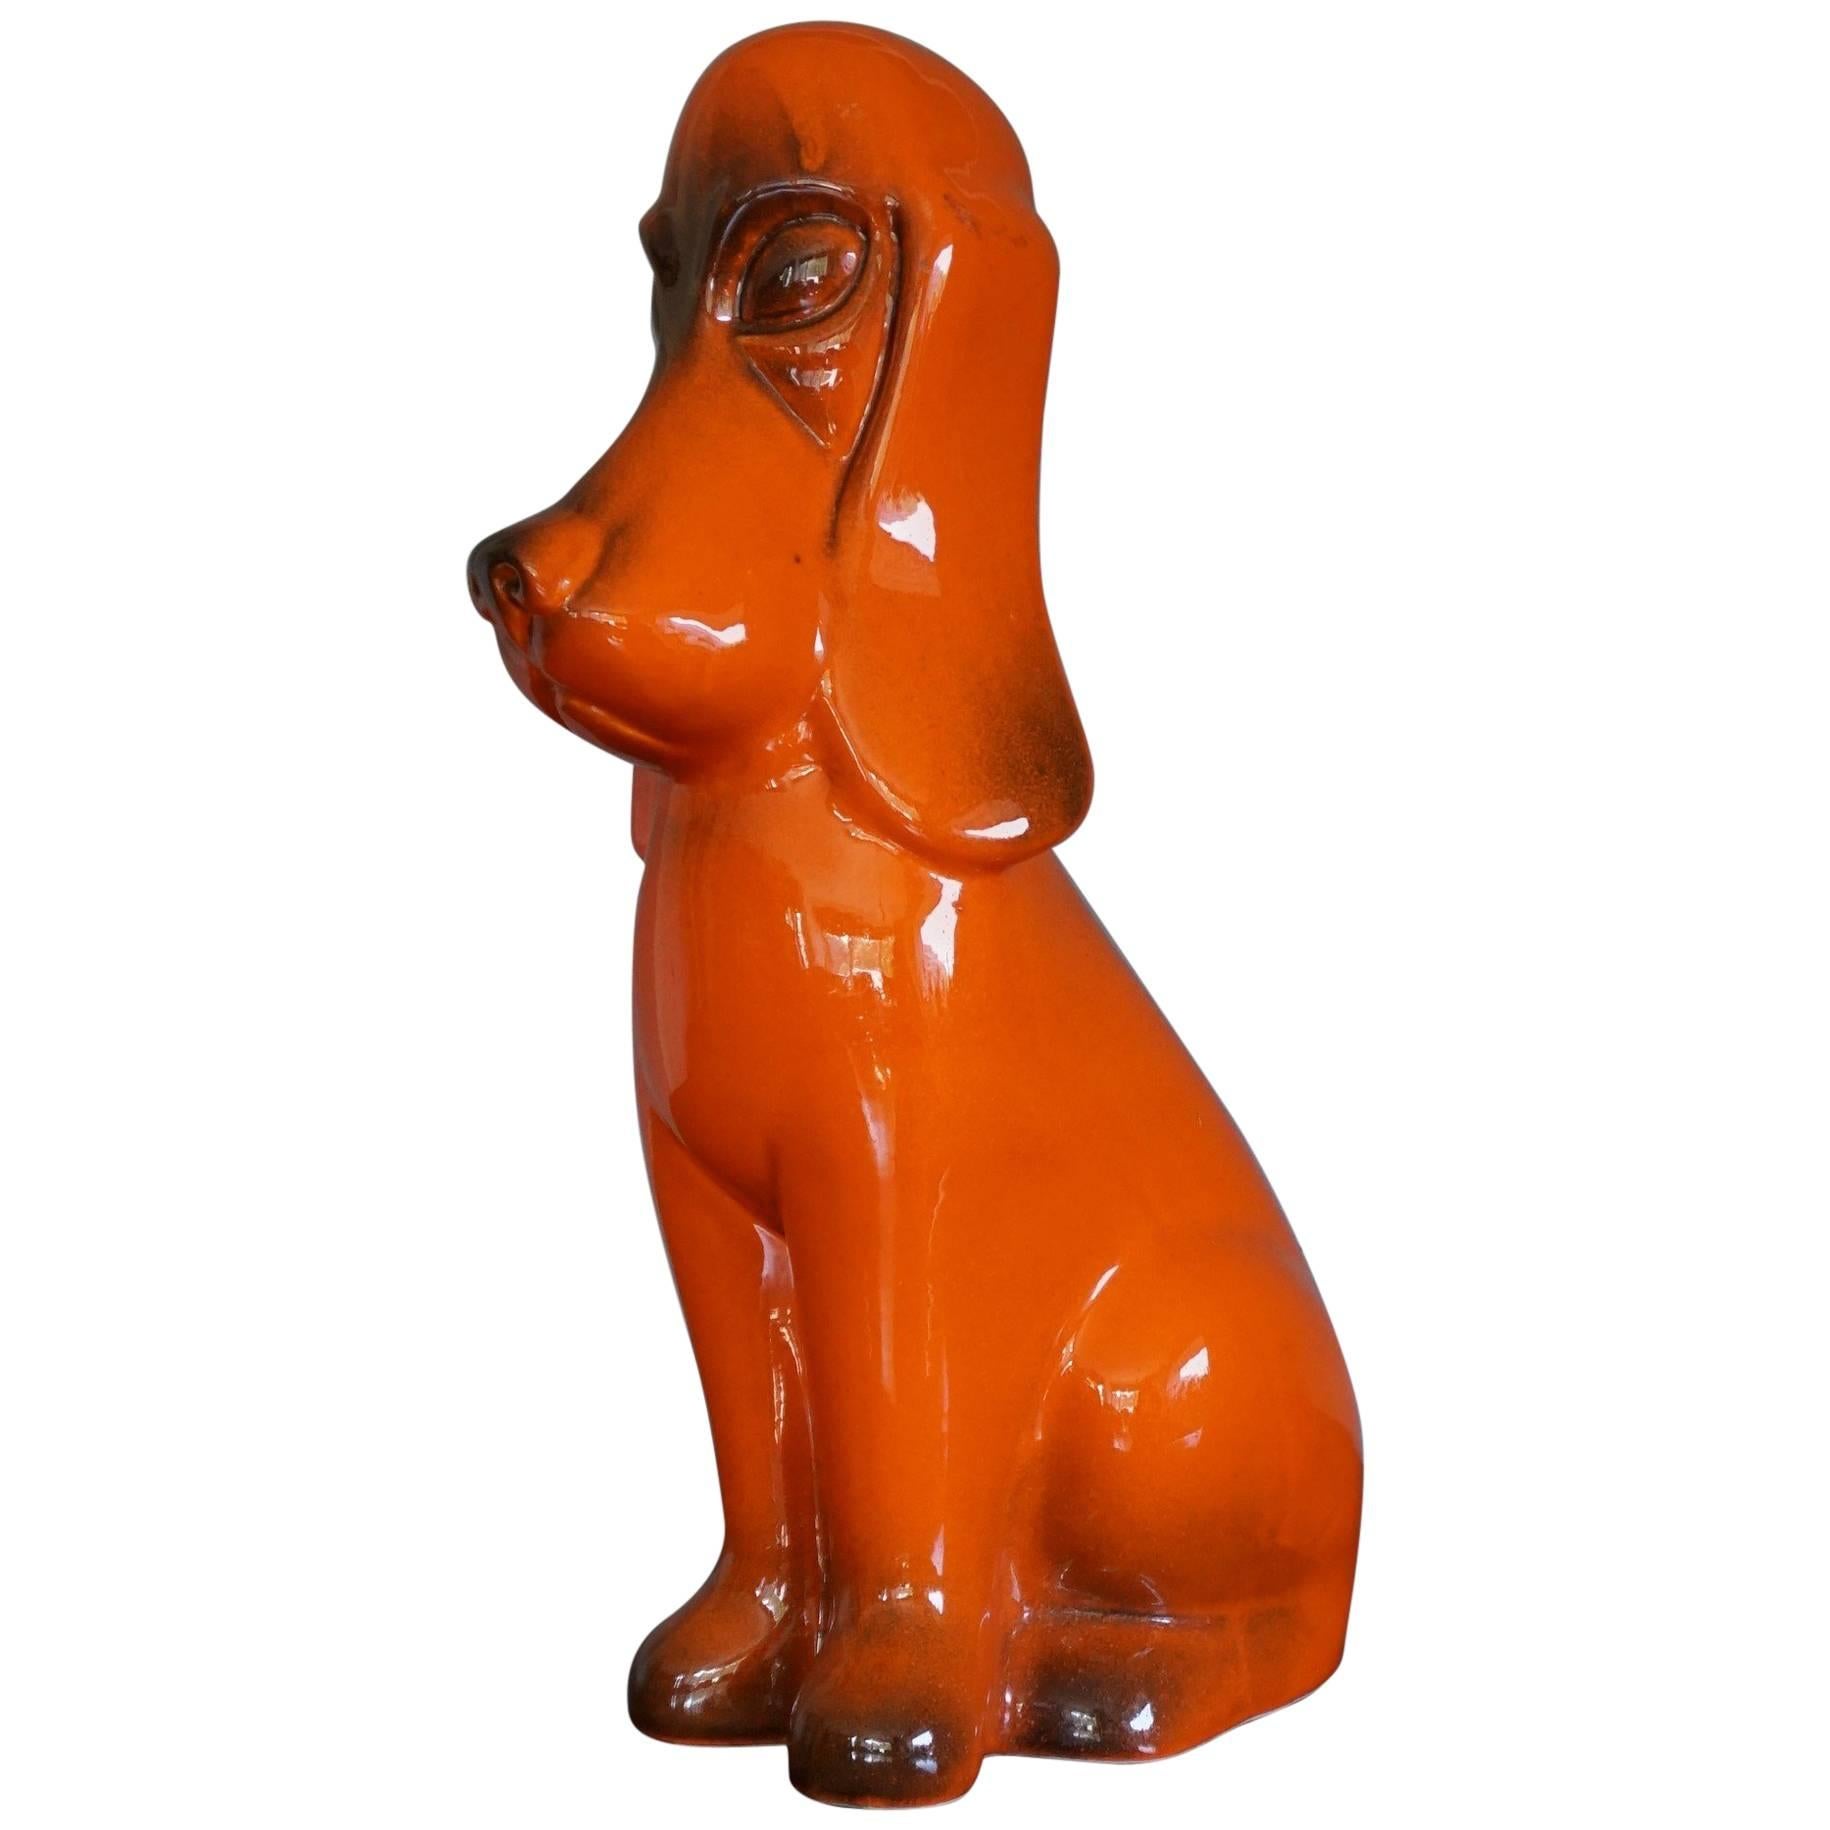 Rare Midcentury Glazed and Marked, Stylized Basset Hound / Droopy Dog Sculpture